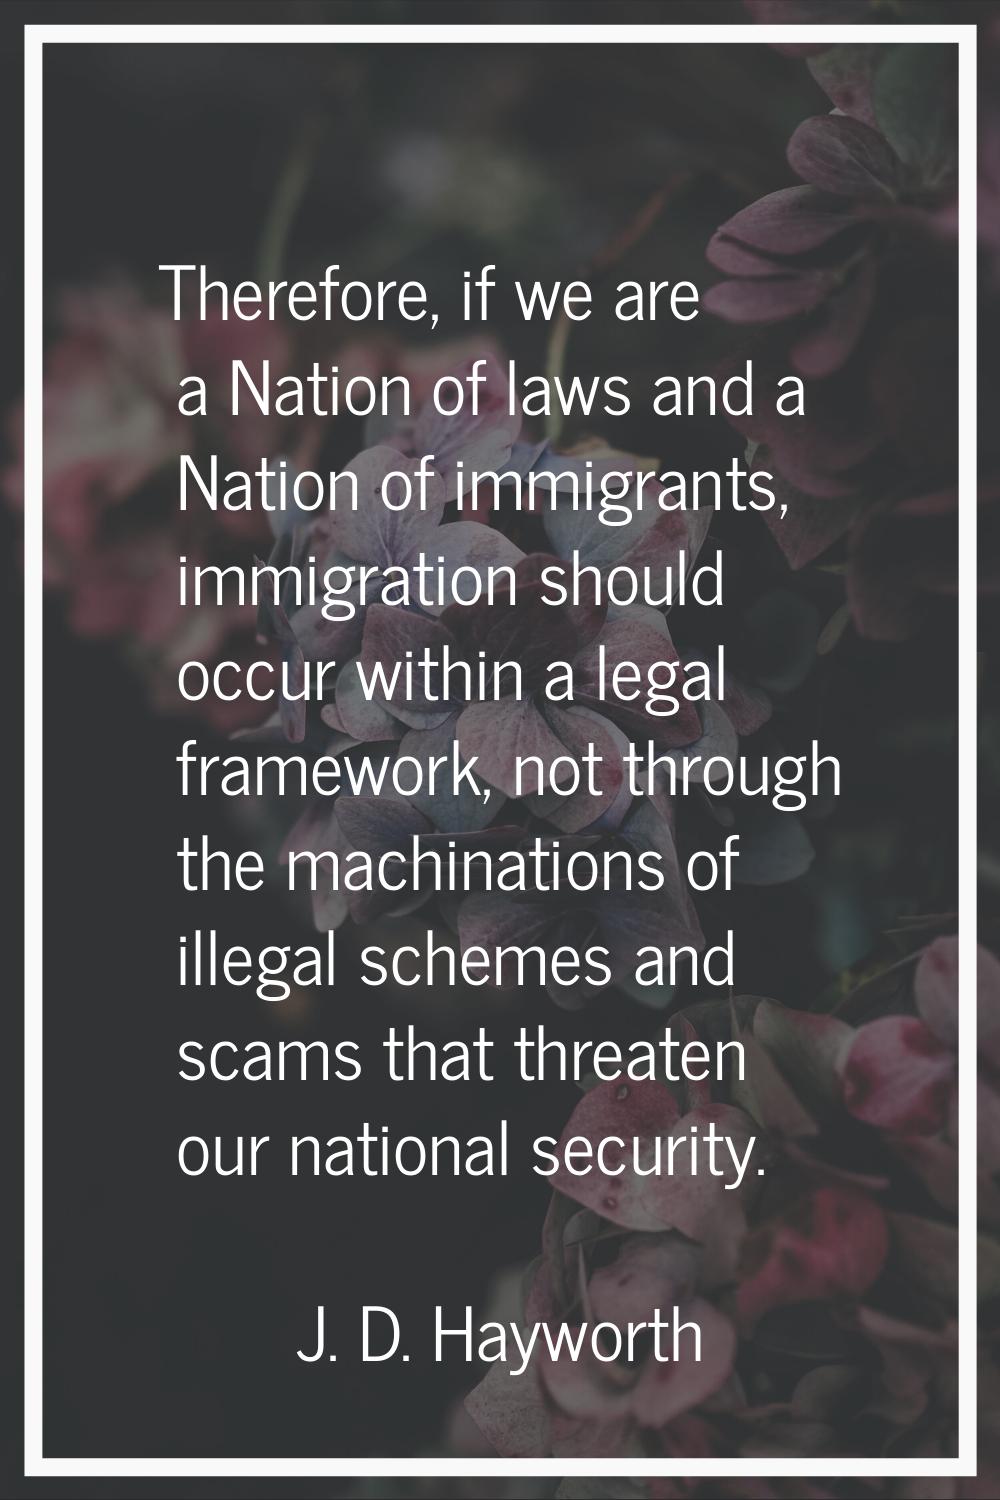 Therefore, if we are a Nation of laws and a Nation of immigrants, immigration should occur within a